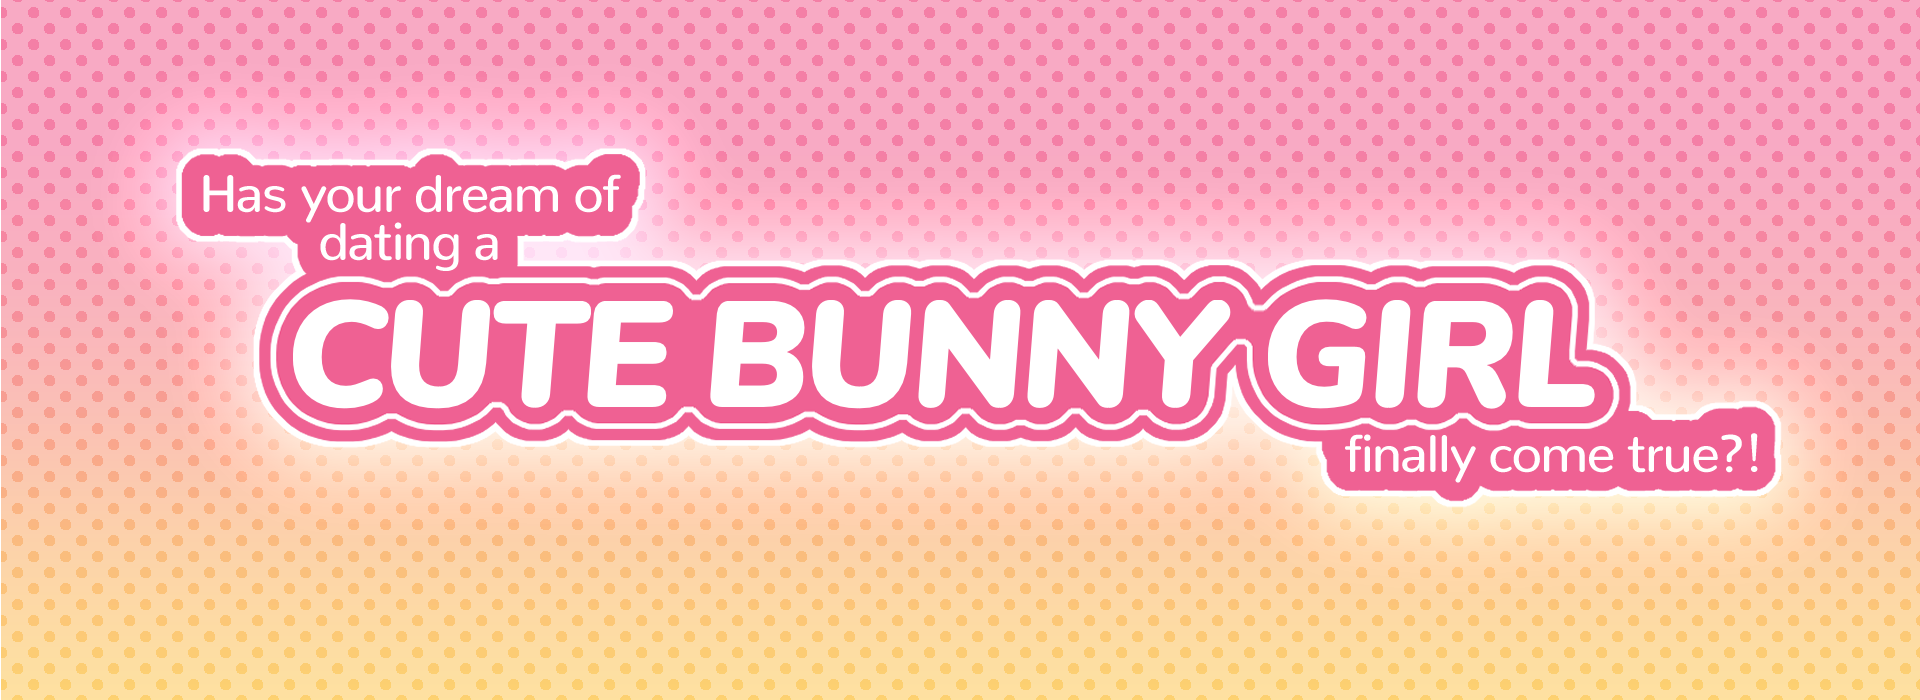 Has Your Dream Of Dating A Cute Bunny Girl Finally Come True?